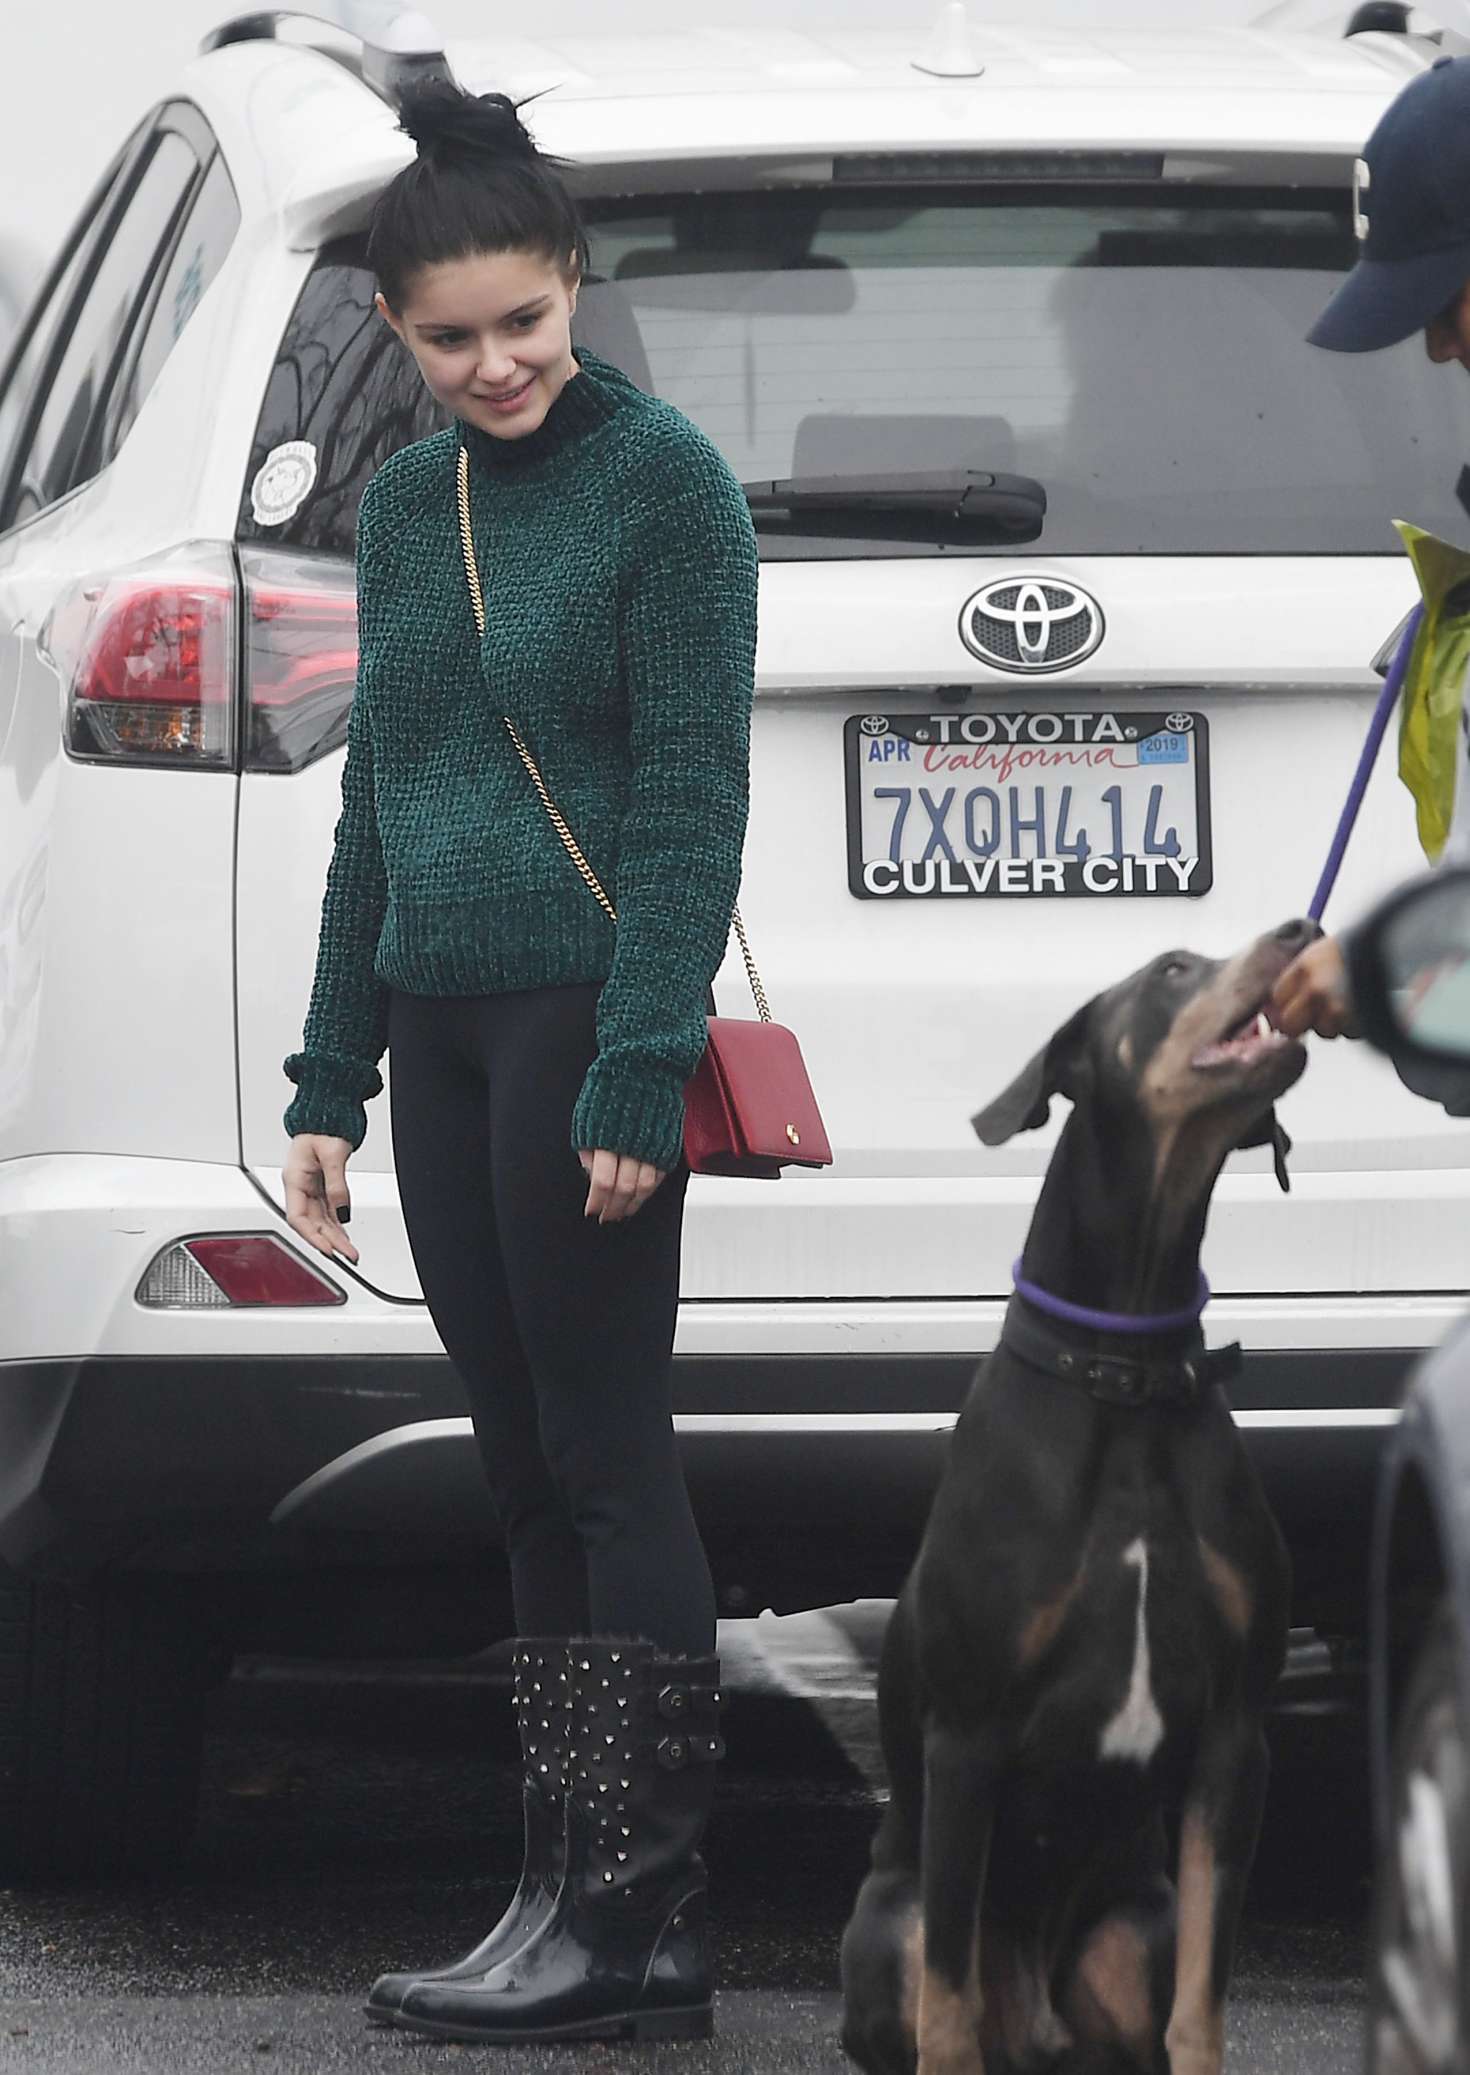 Ariel Winter in Tights at Wags & Walks Dog Adoption Center in Los Angeles